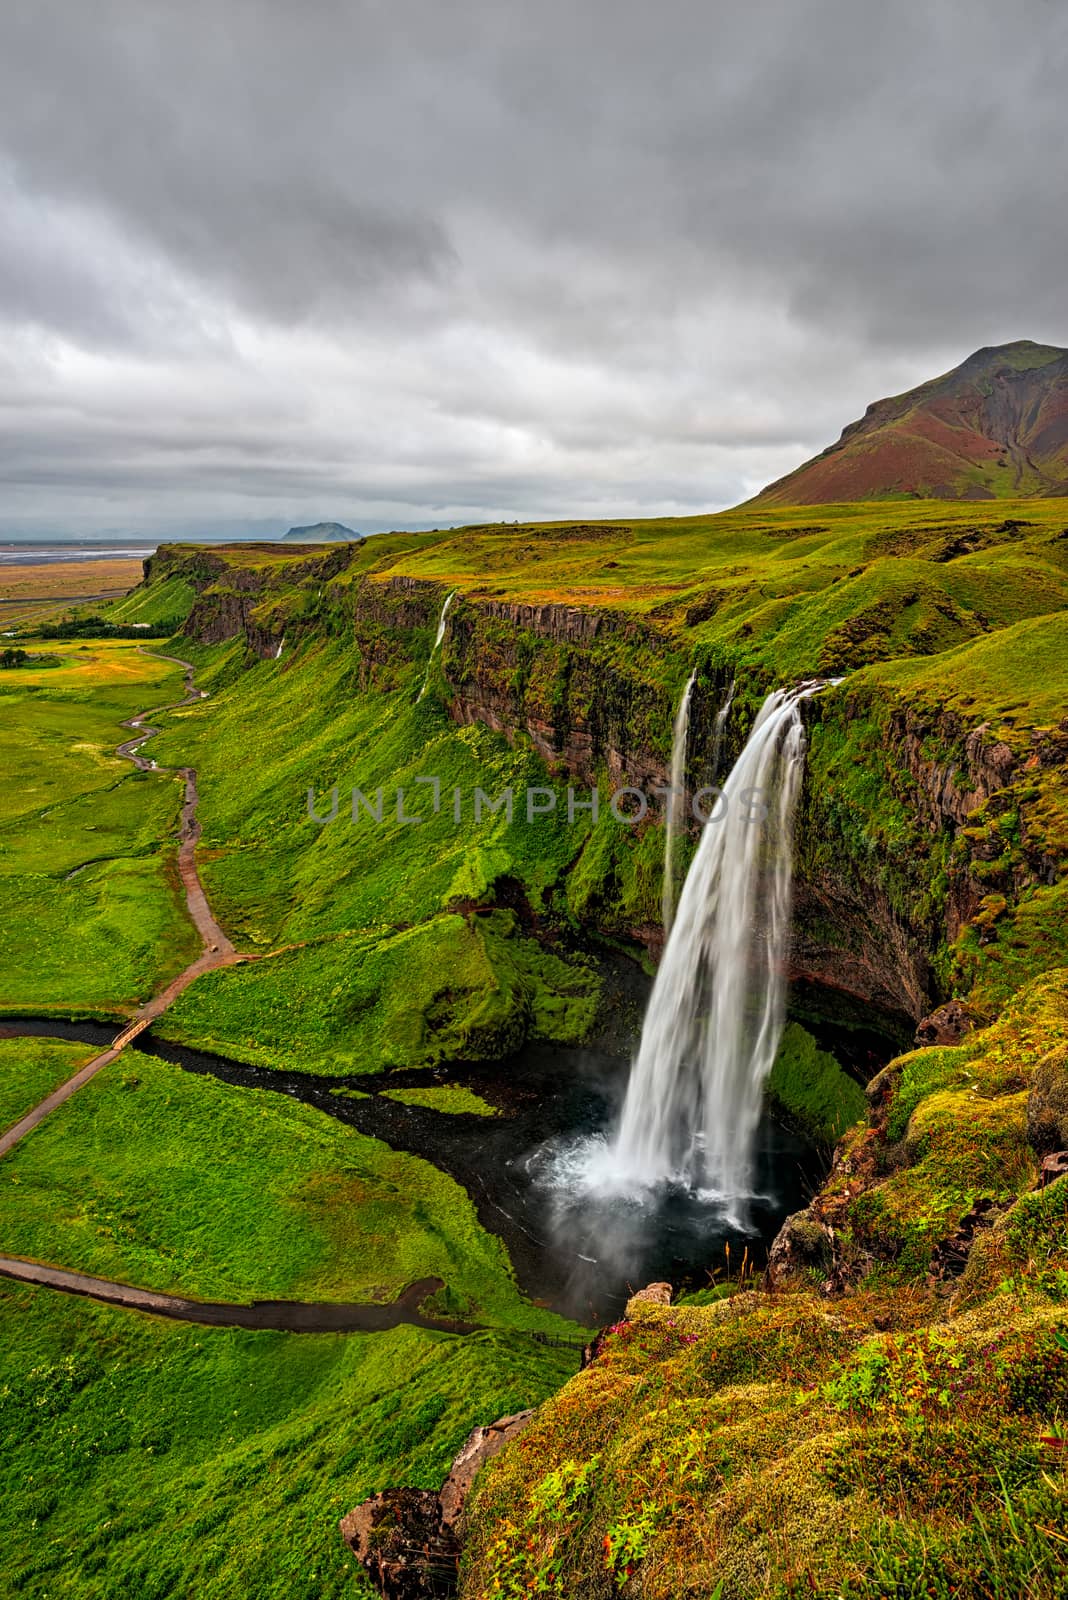 Seljalandsfoss waterfall in a cloudy day seen from above, Iceland